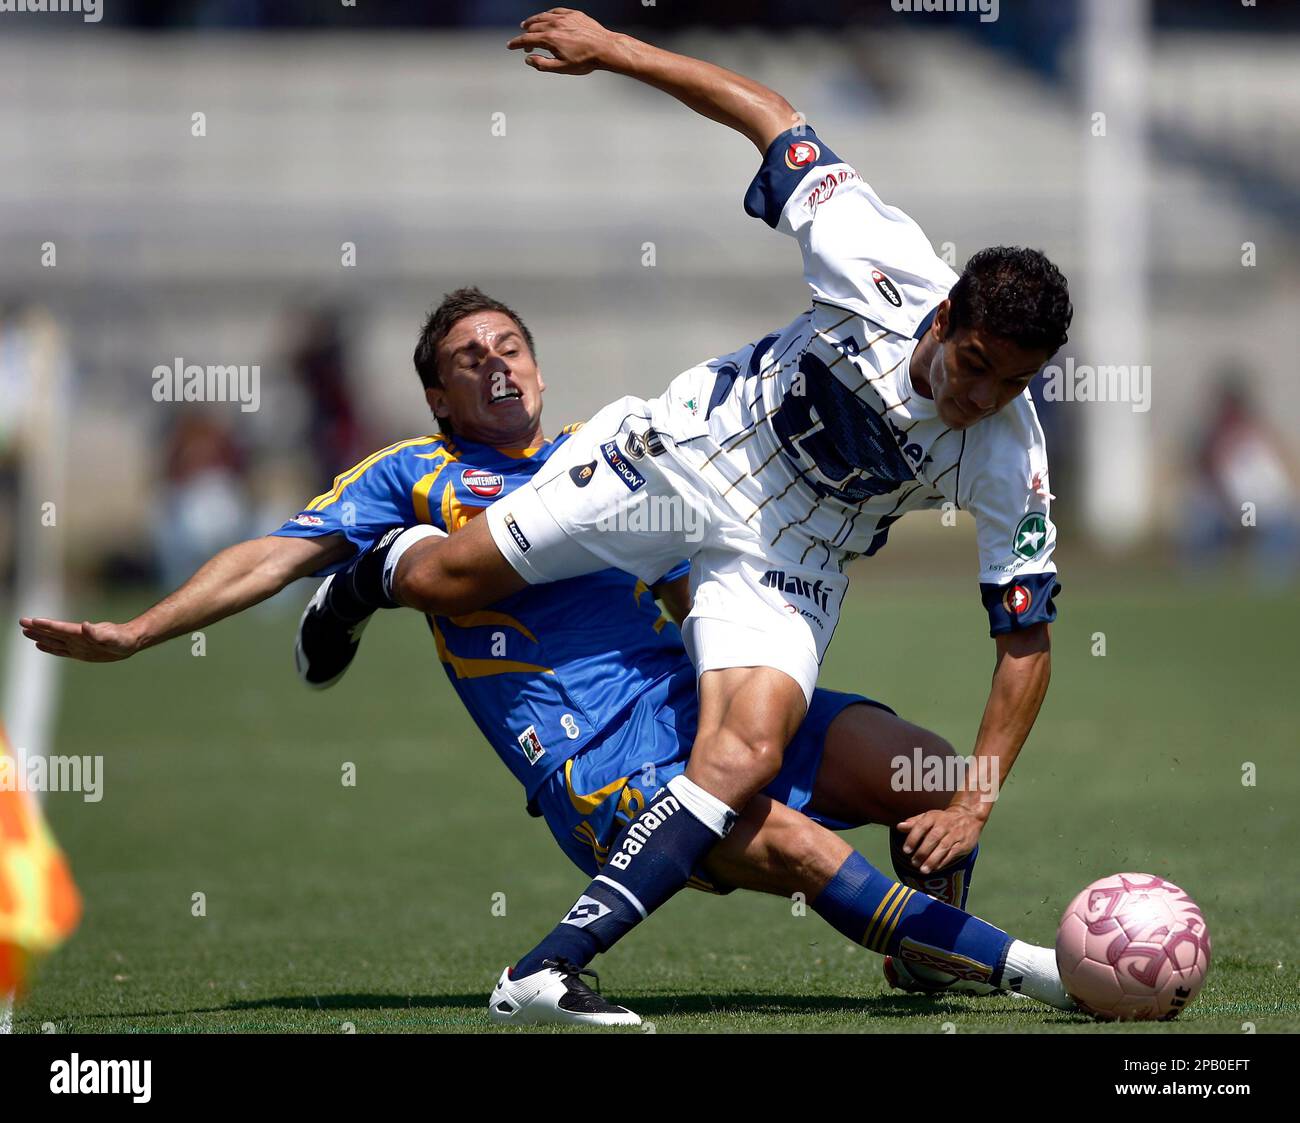 Pumas's Pablo Barrera, front, battles for the ball with Tigres' Lucas Ayala during their Mexican soccer league match in Mexico City, 14, 2007. Pumas 3-0.( AP Photo/ Claudio